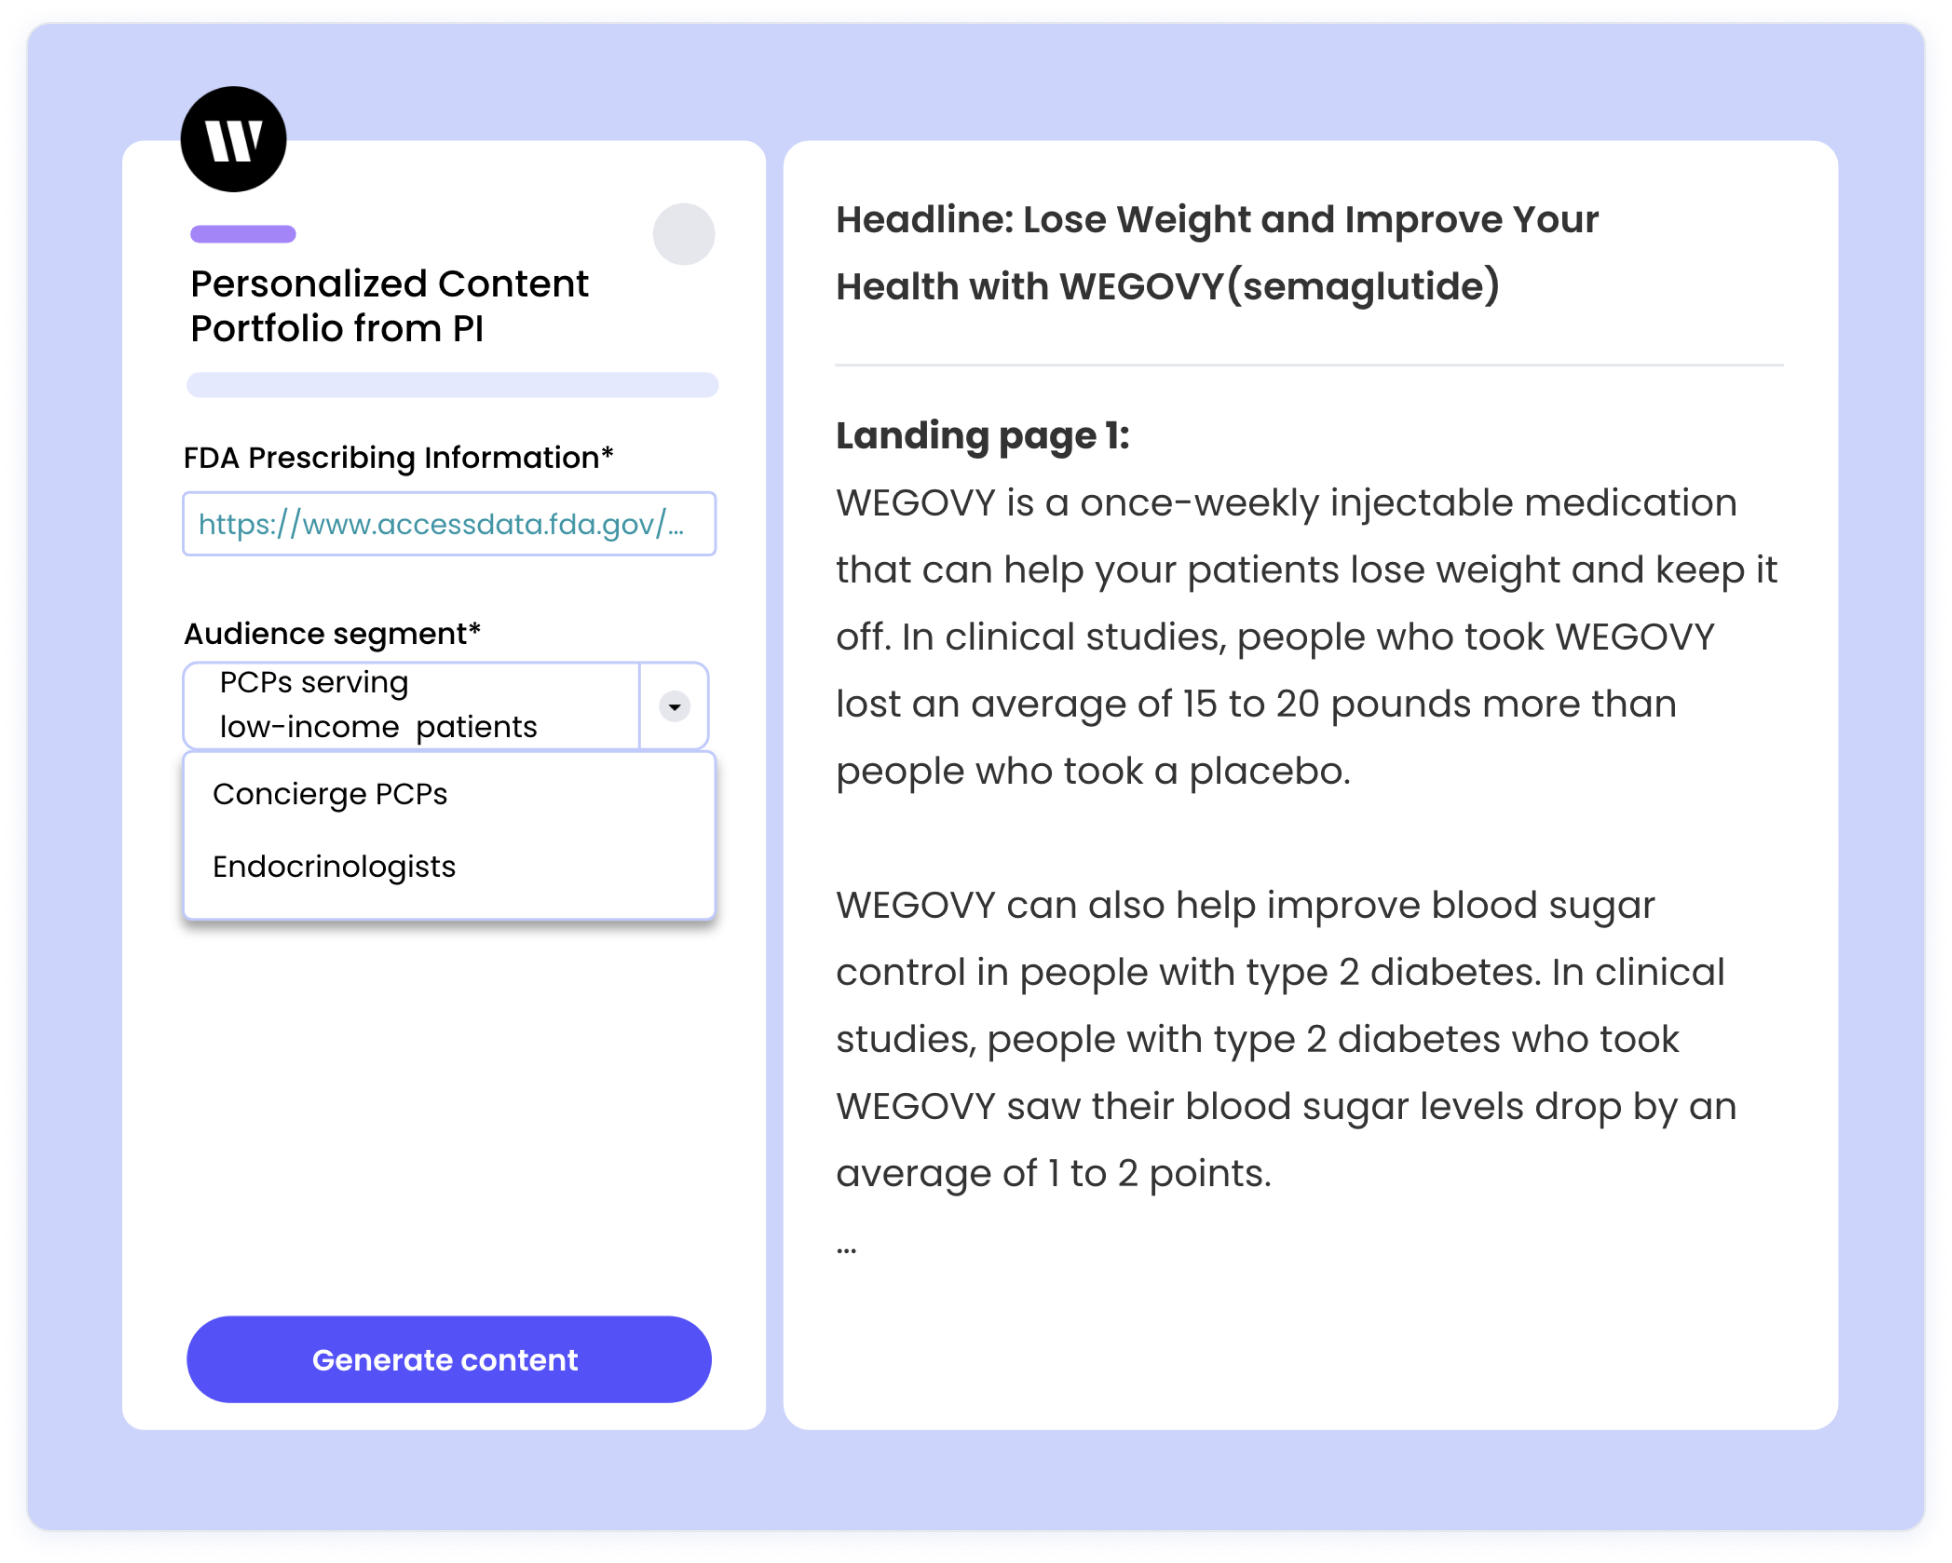 A custom-built app in Writer, showing a series of user inputs and the output for a landing page for a weight loss medication